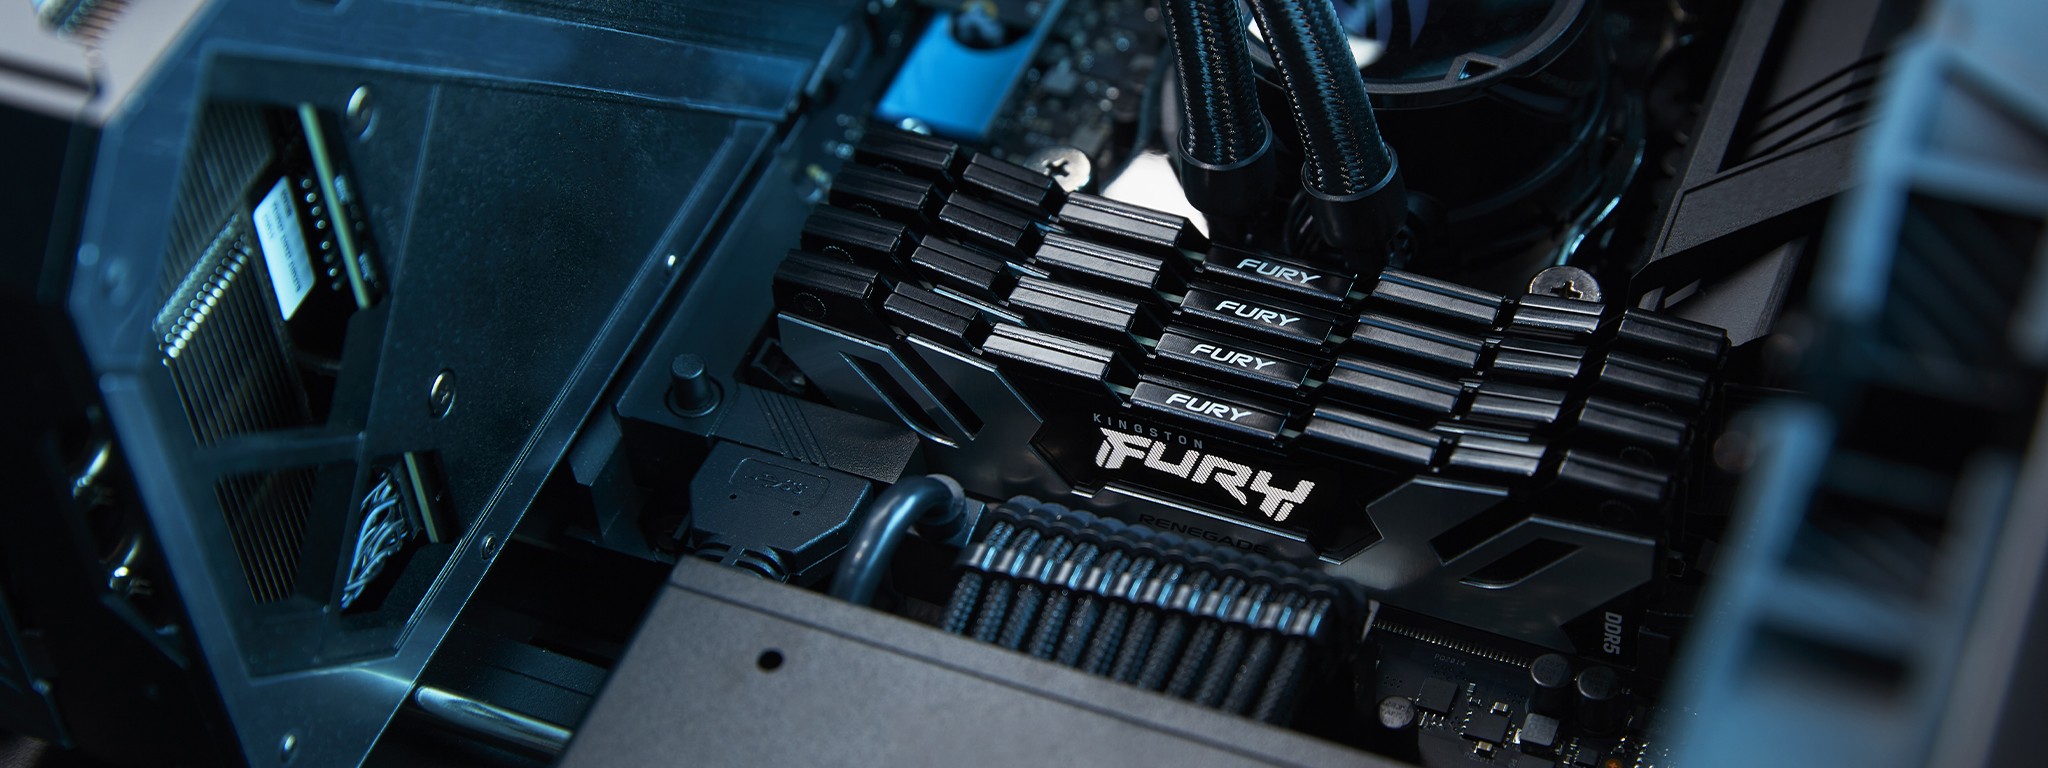 How To Determine The RAM Capacity Of Your Graphics Card